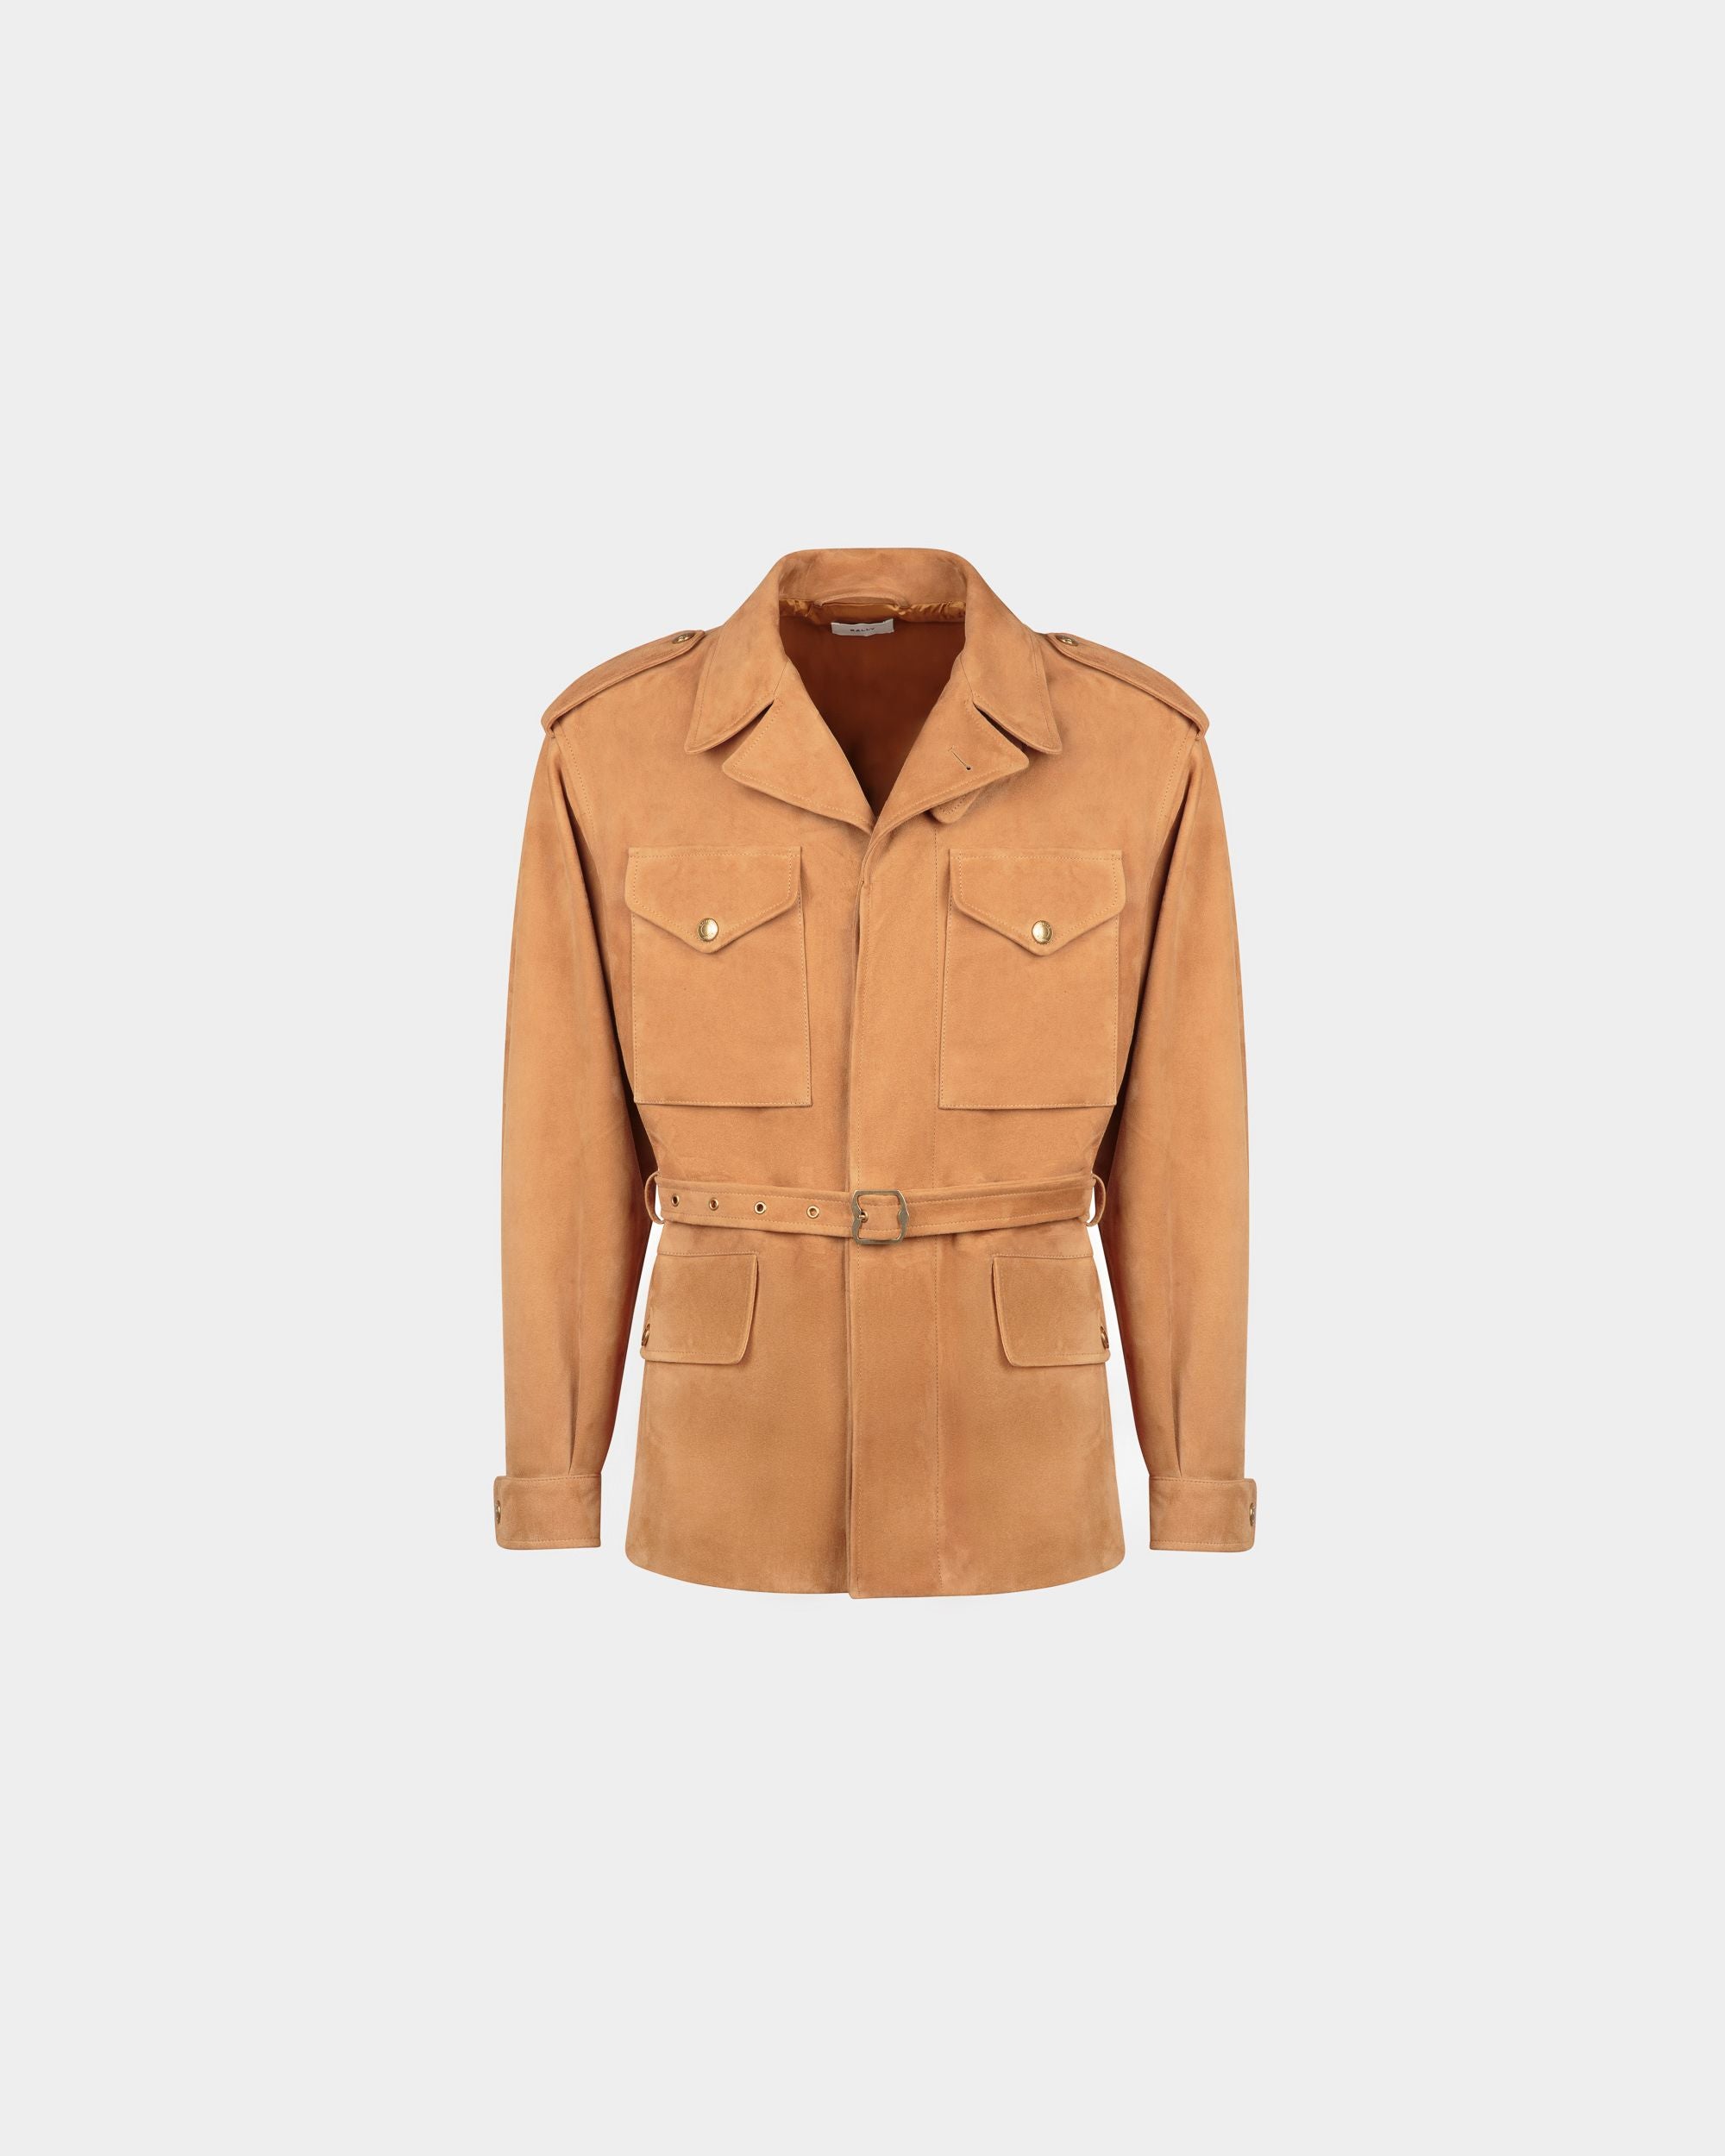 Men's Jacket in Suede | Bally | Still Life Front